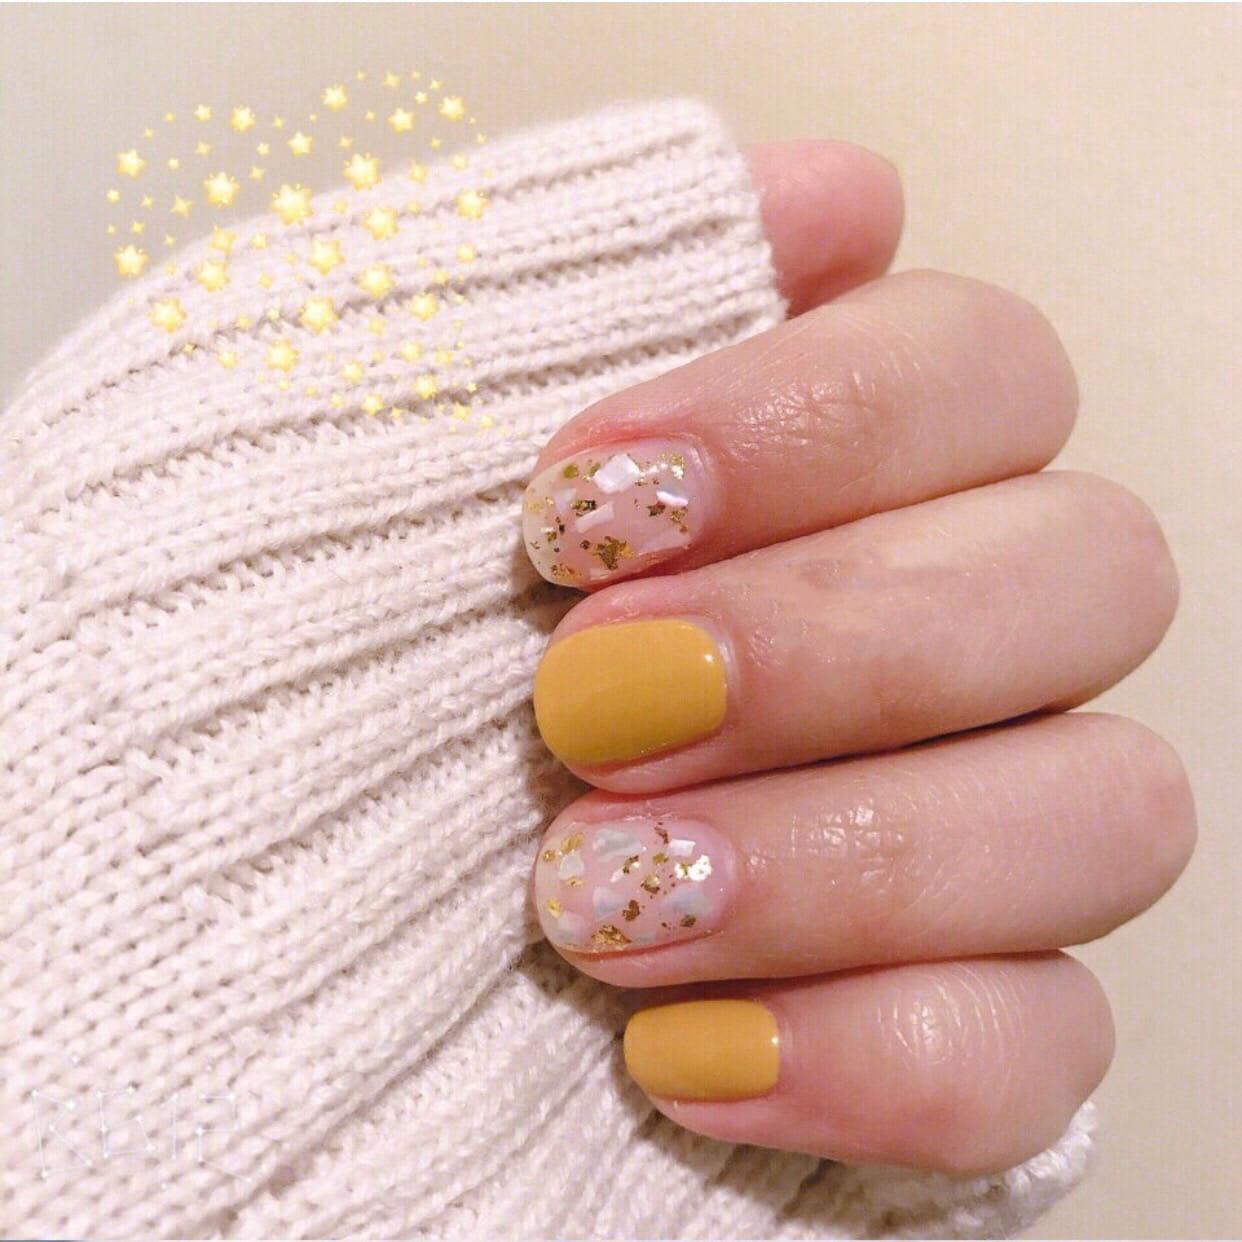 100+ Short Nail Designs You’ll Want To Try This Year images 26